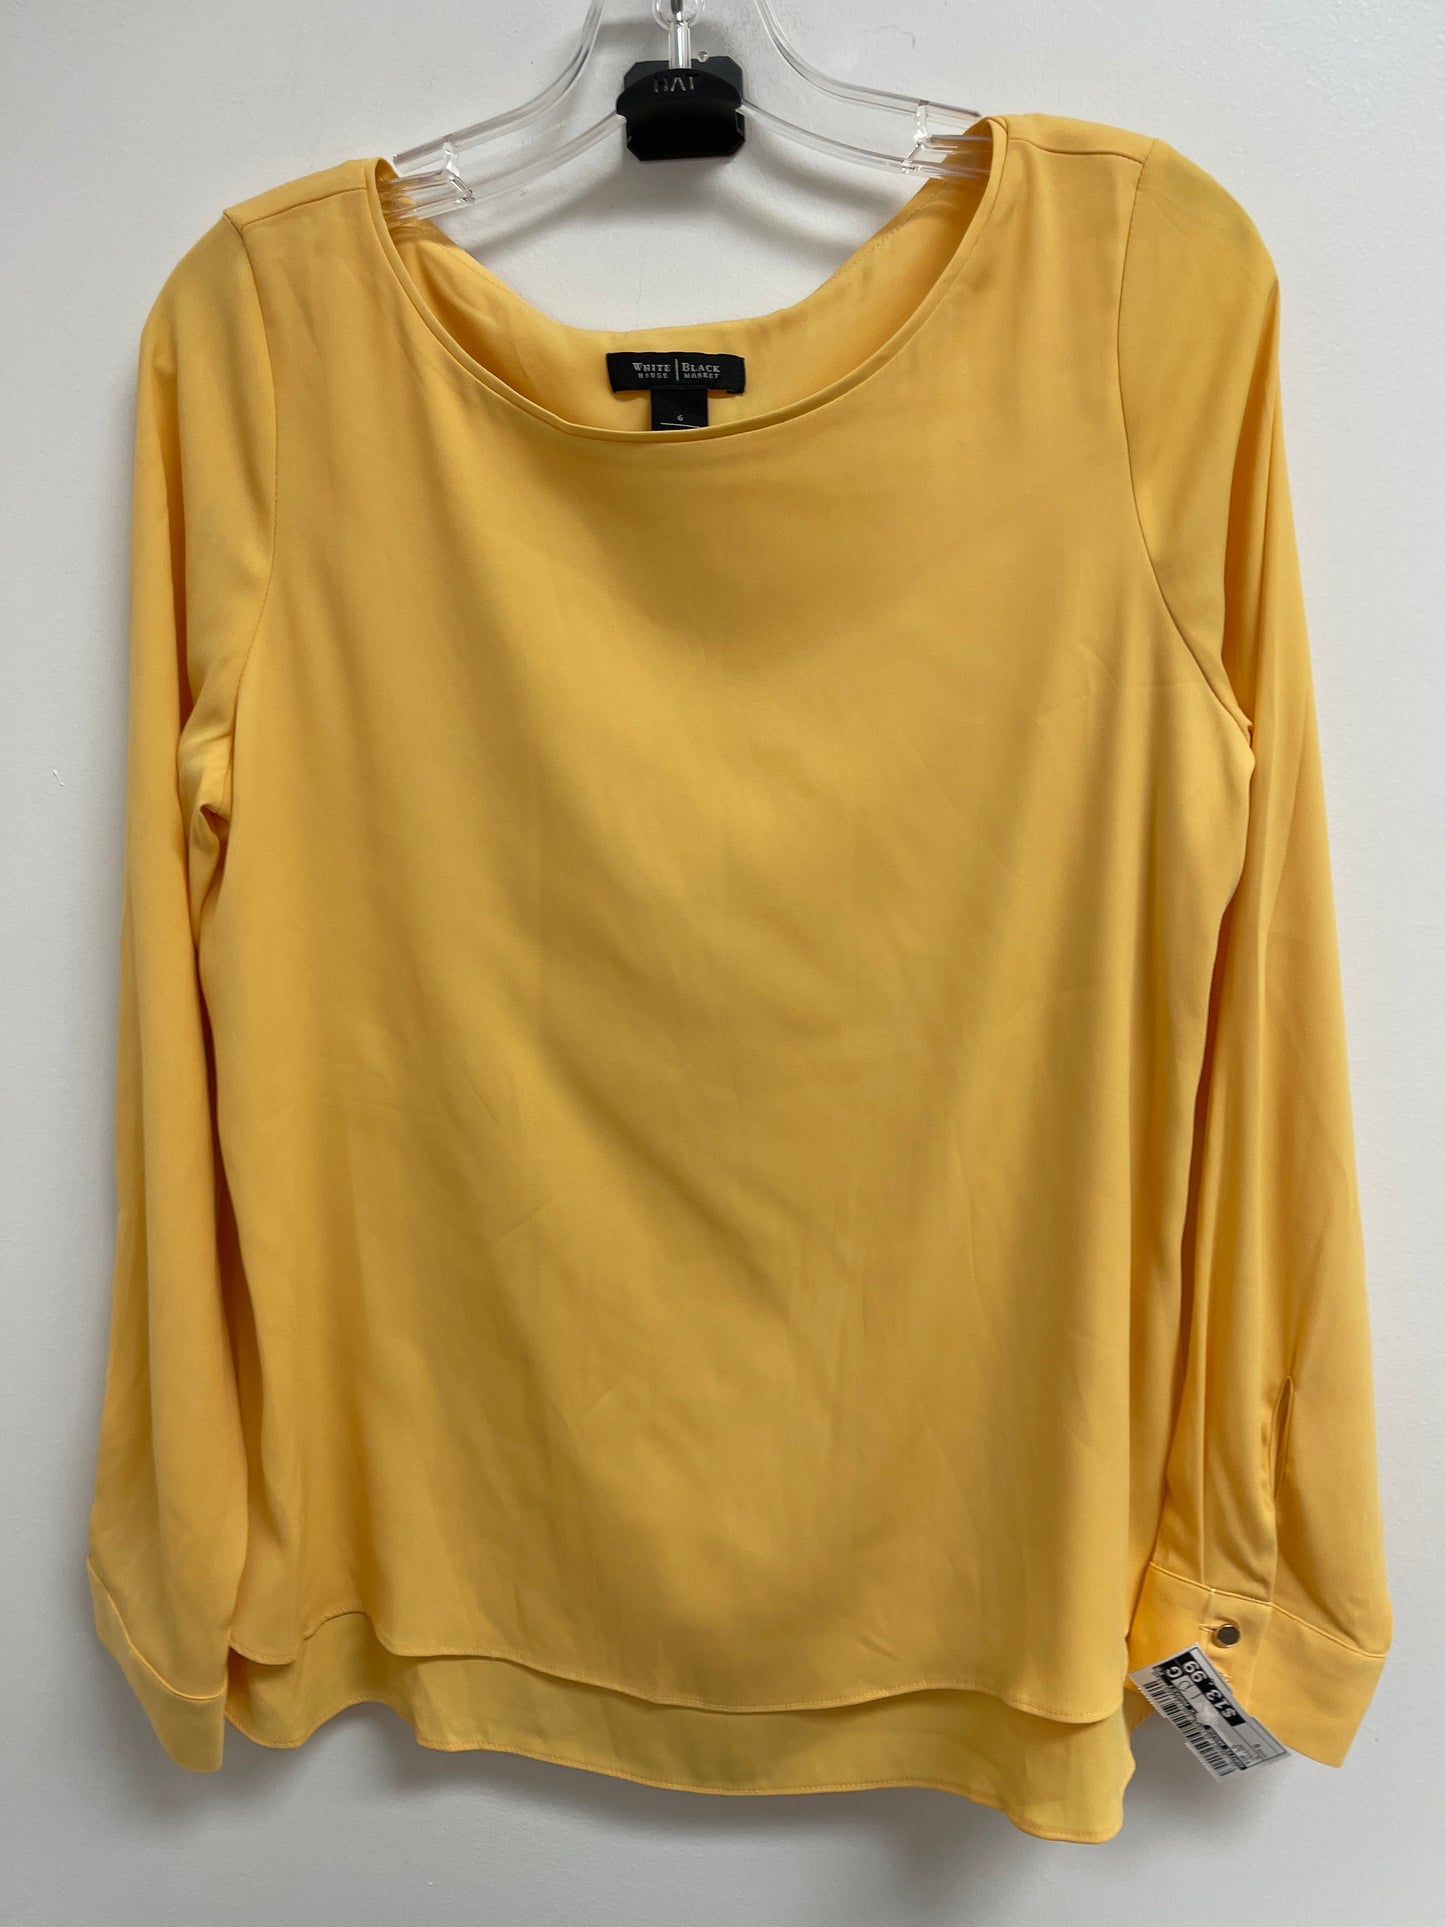 Yellow Top Long Sleeve White House Black Market, Size S